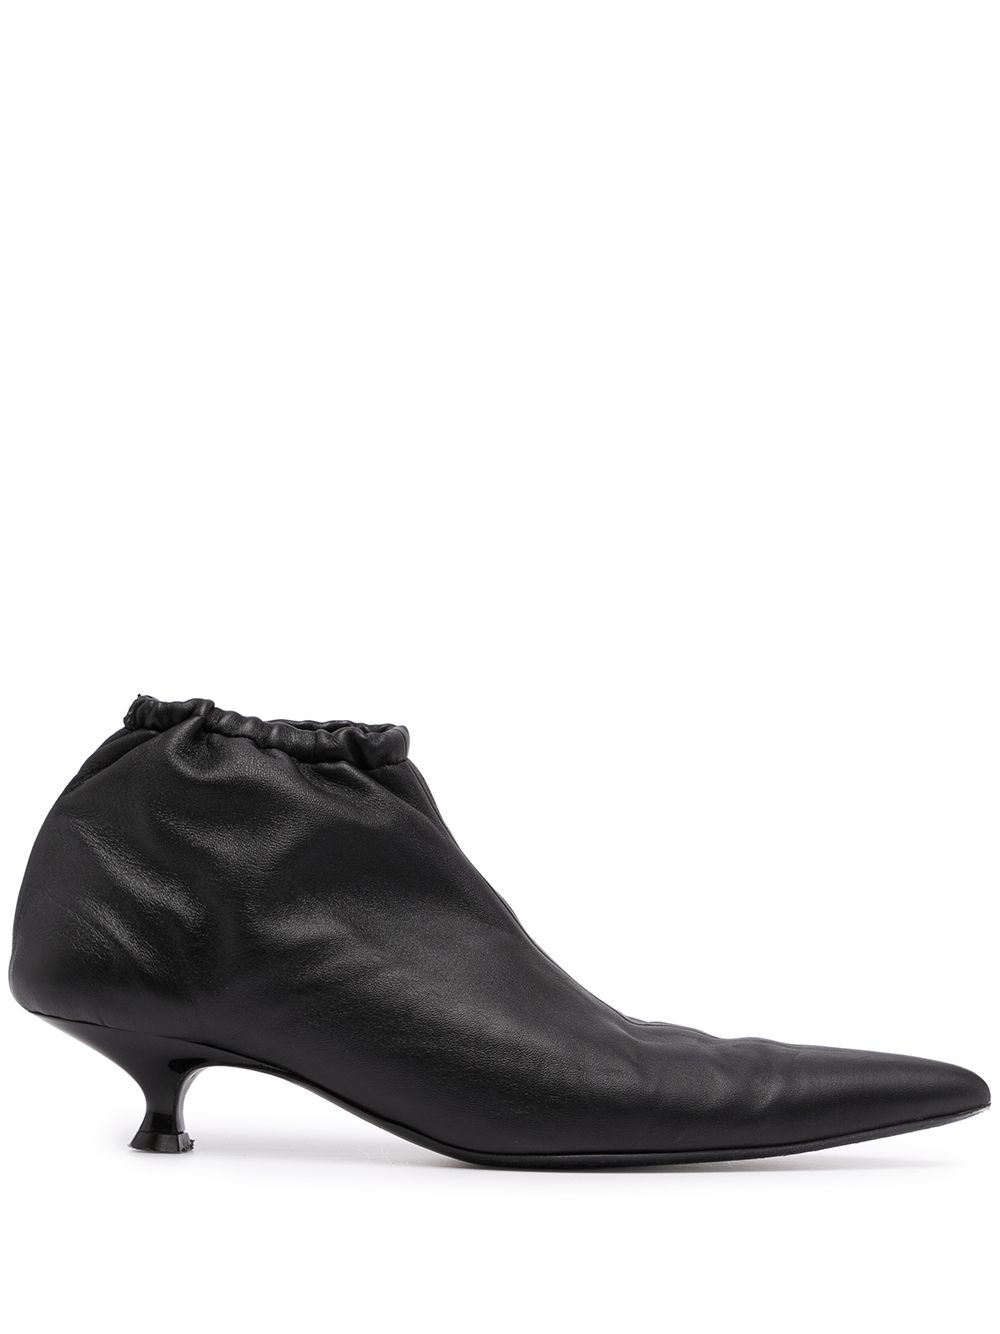 Volos leather ankle boots